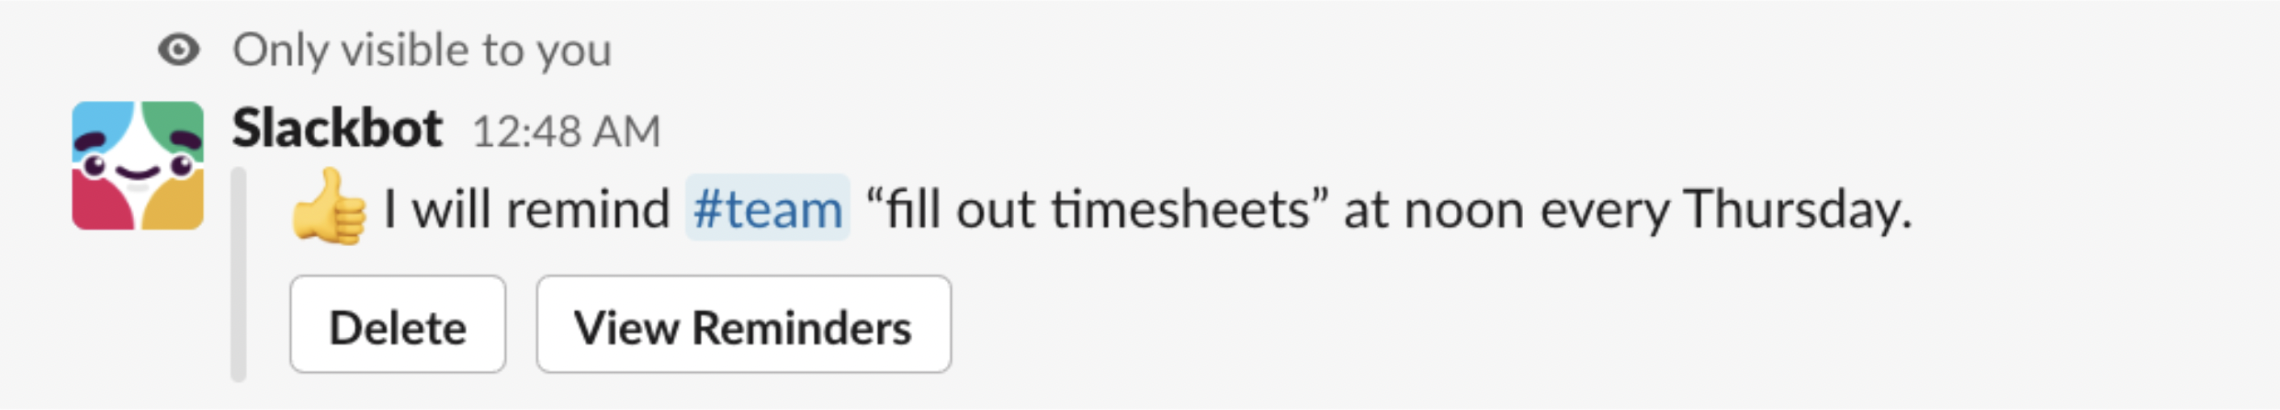 A message from the Slackbot in Slack, confirming a scheduled employee reminder